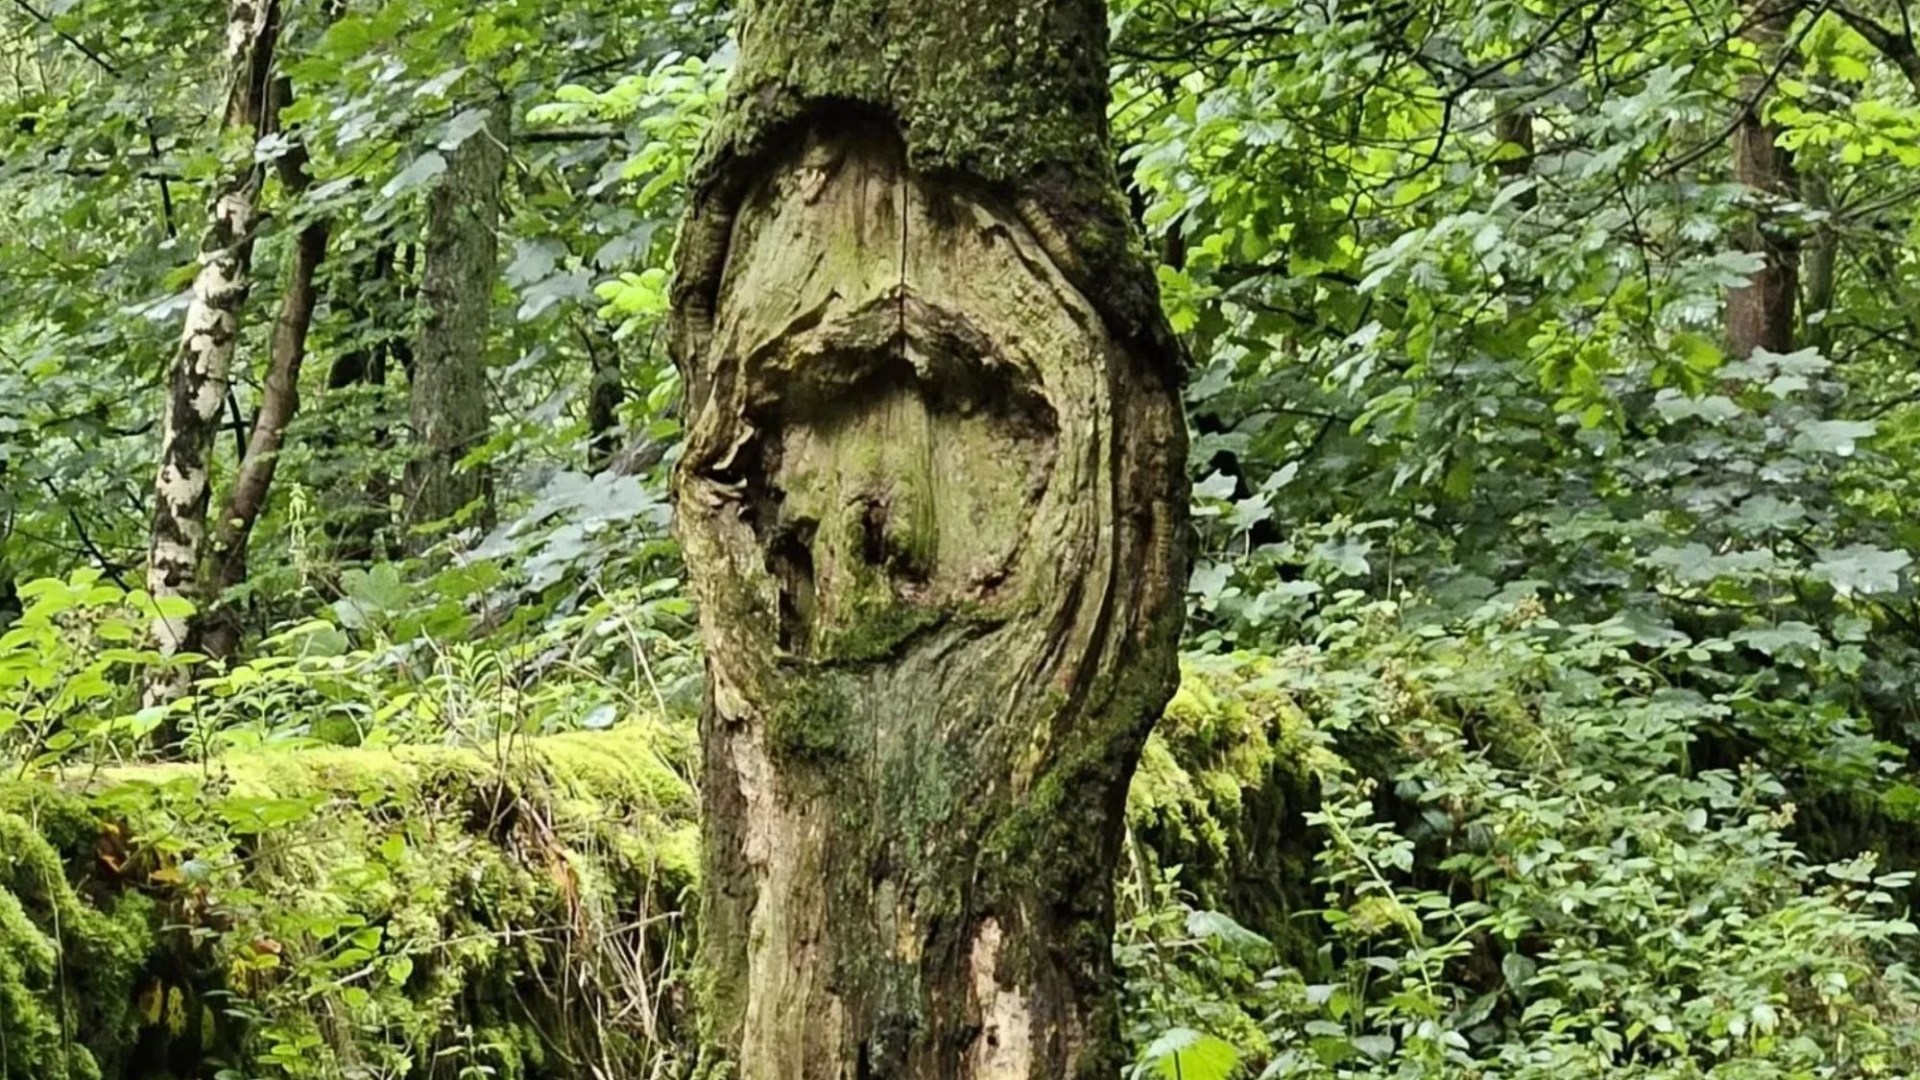 Can you identify the face of the legendary Brit Rocker that a dog-walker spotted in a tree?